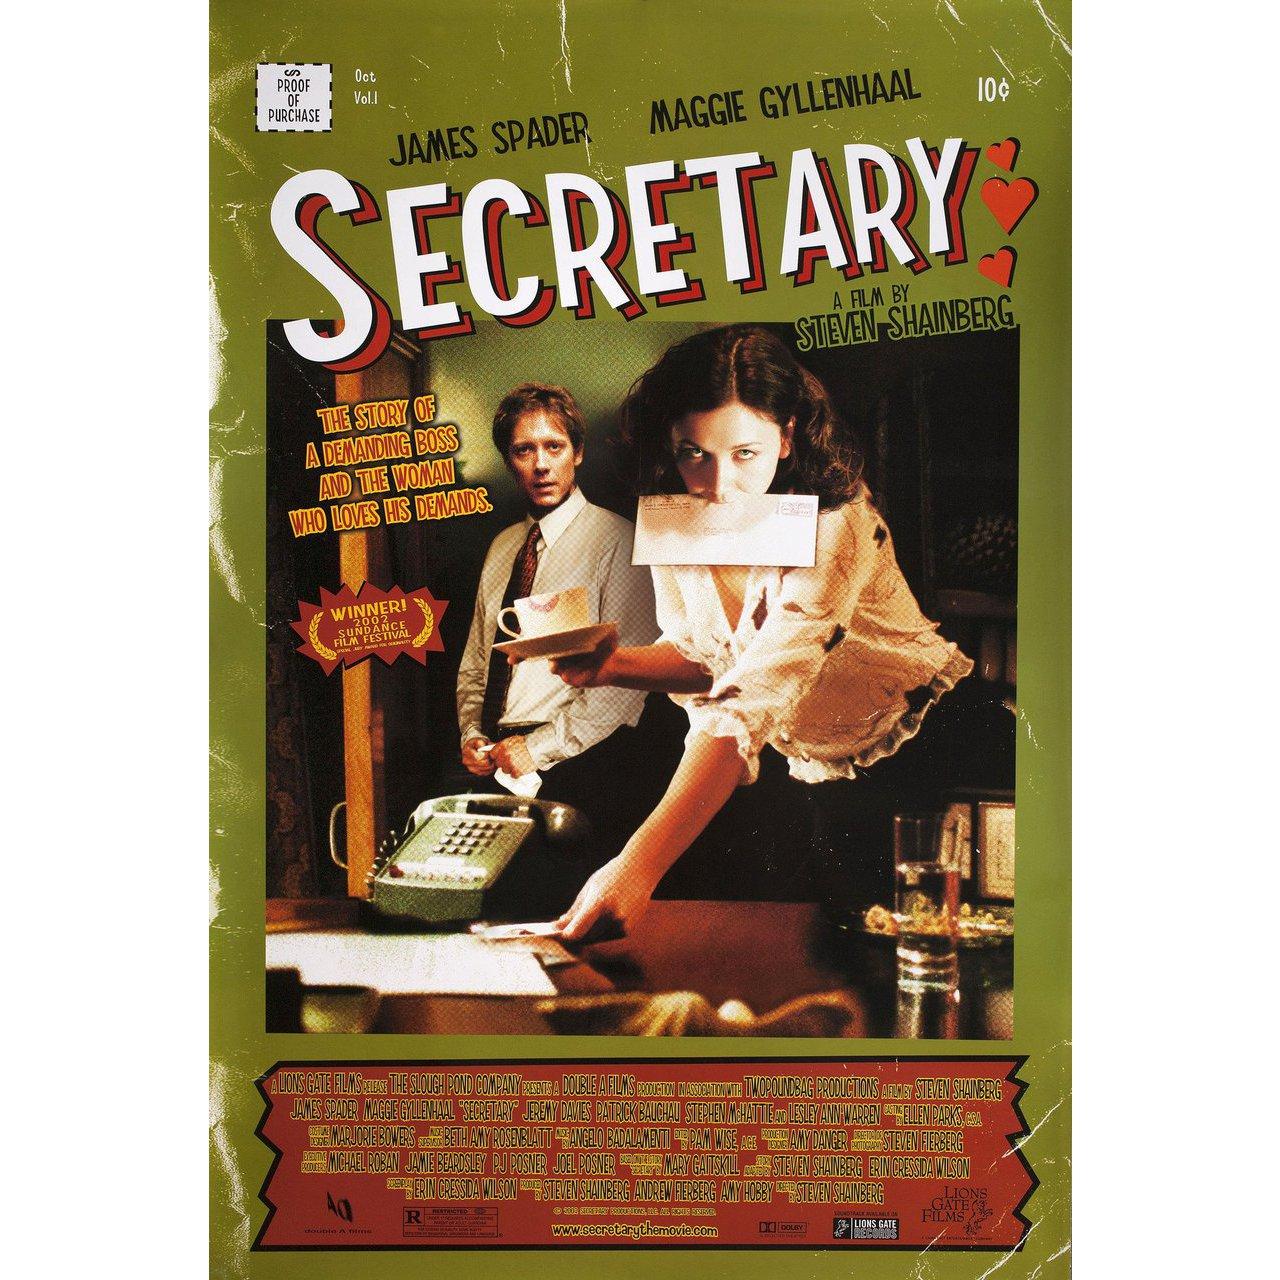 Original 2002 U.S. one sheet poster for the film Secretary directed by Steven Shainberg with James Spader / Maggie Gyllenhaal / Jeremy Davies / Lesley Ann Warren. Very good-fine condition, rolled. Please note: the size is stated in inches and the